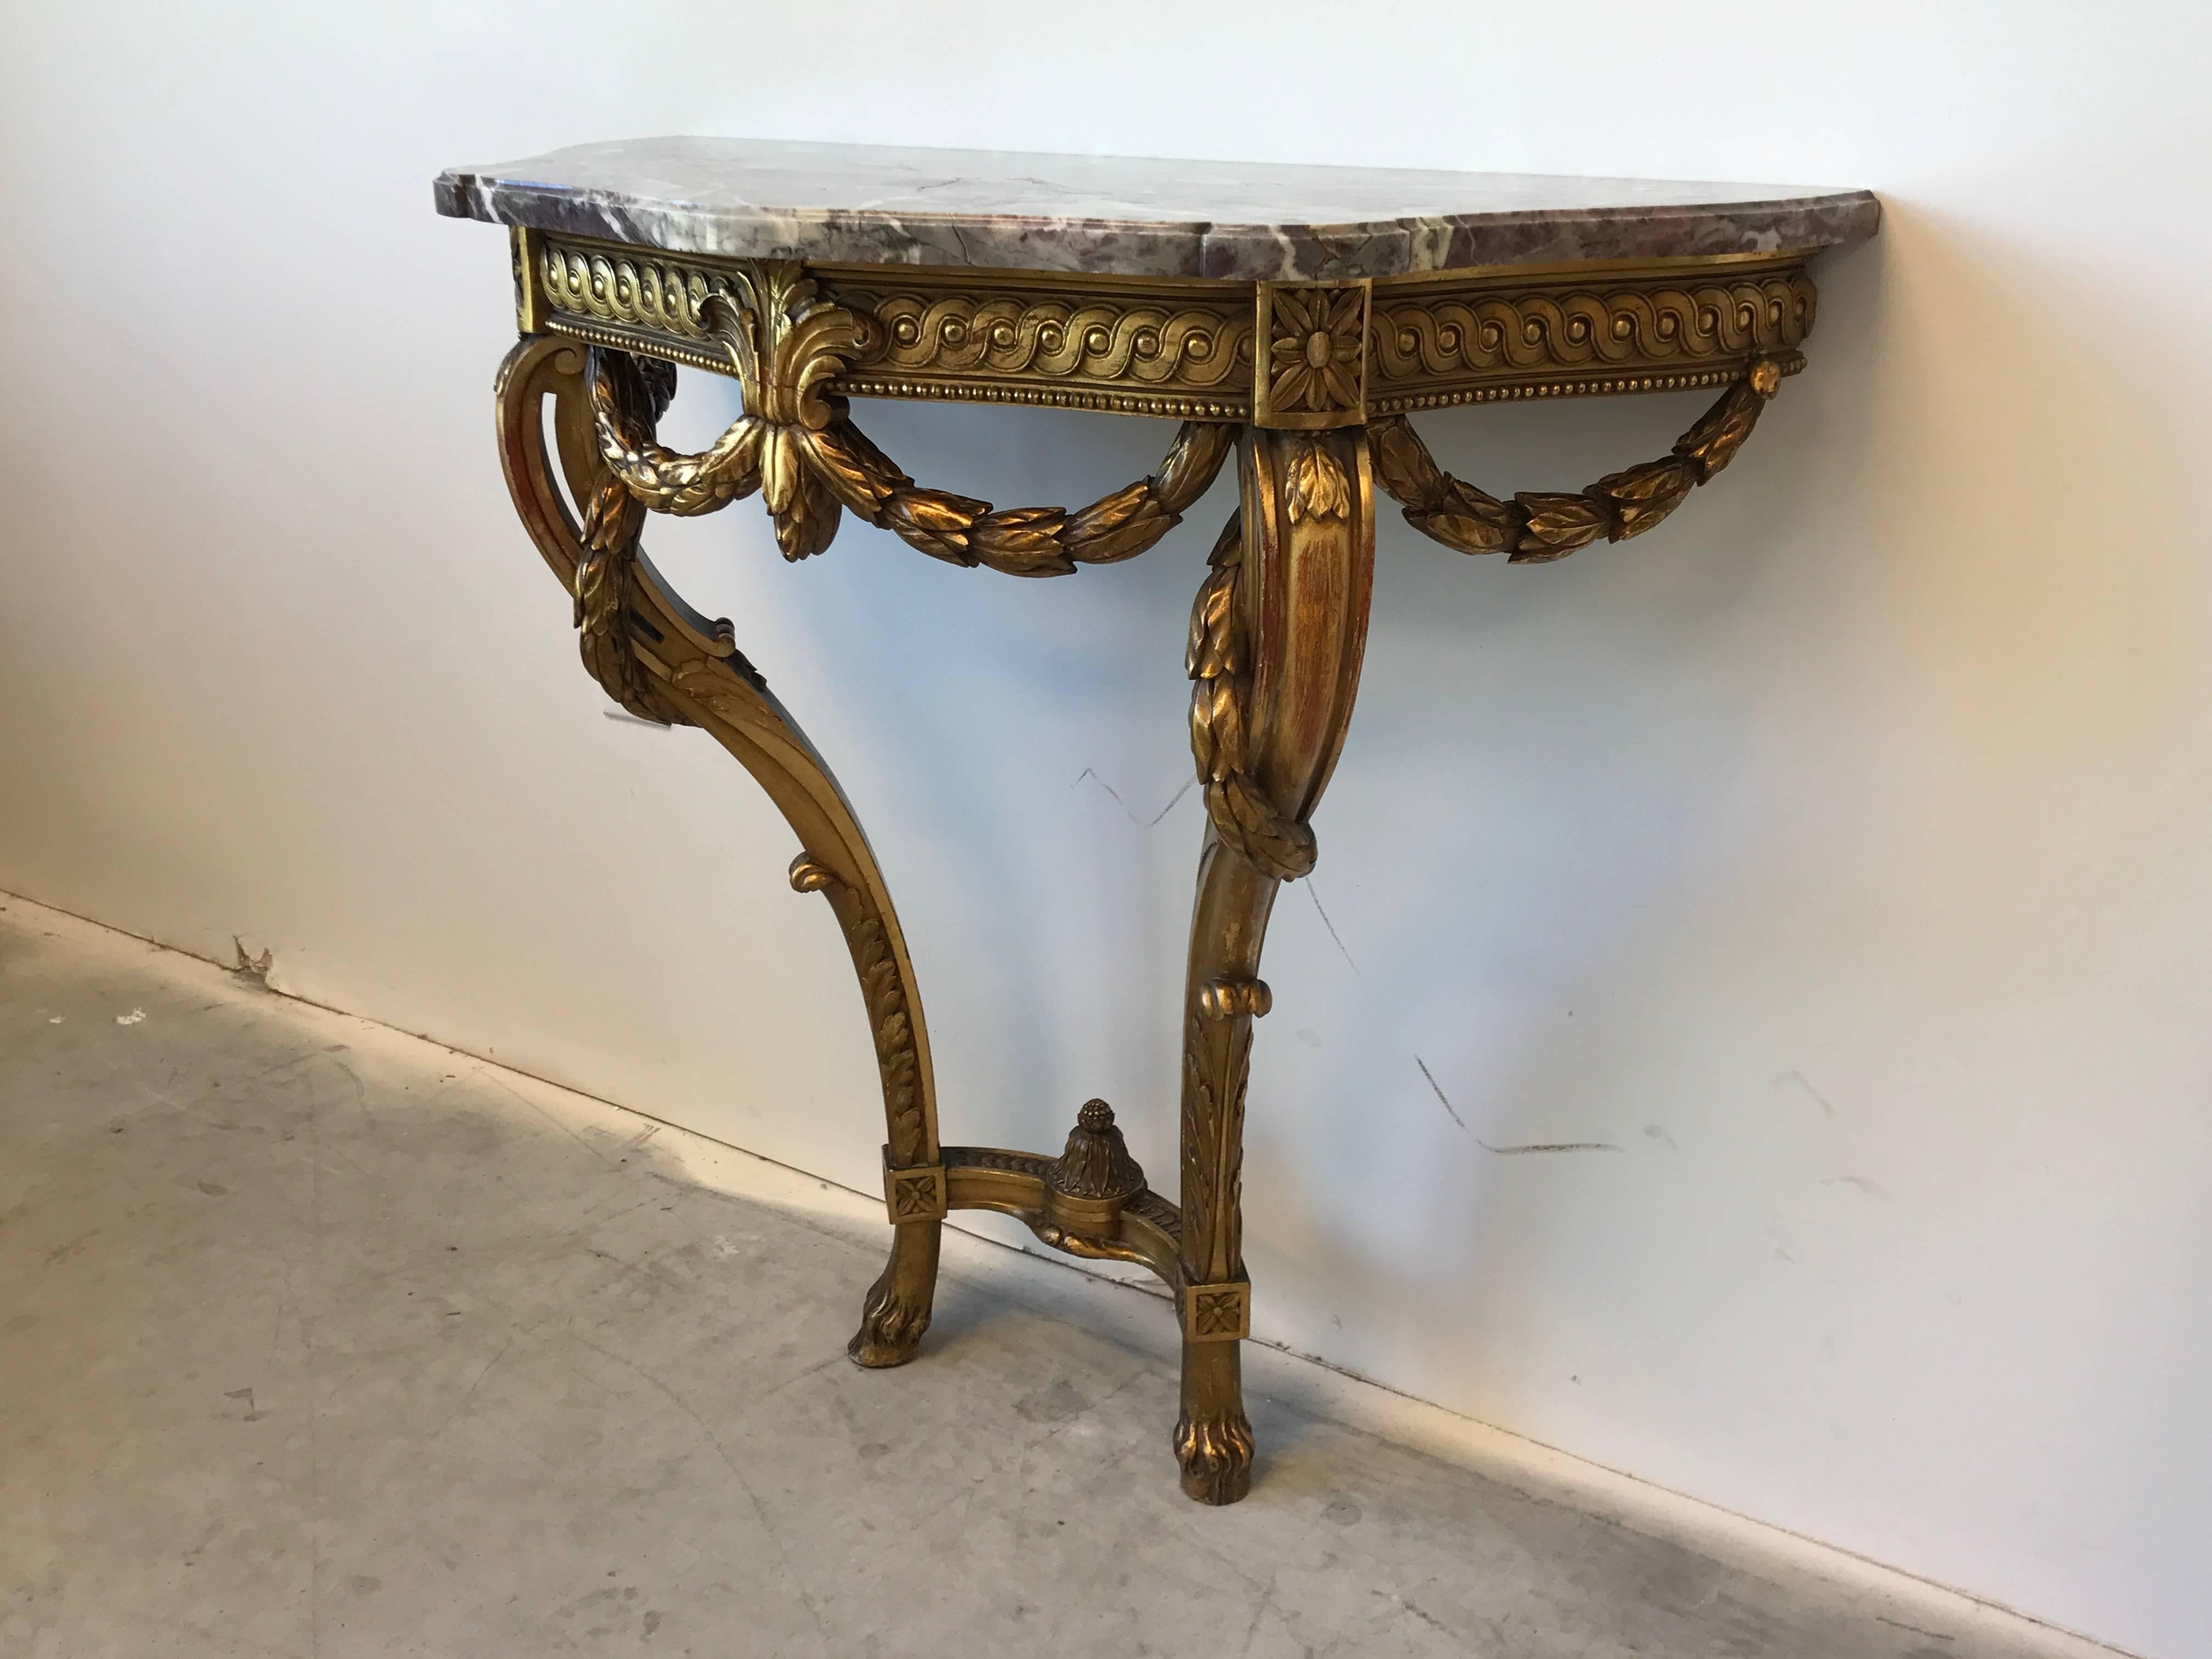 Offered is a stunning, 19th century, Louis XVI style French giltwood demilune wall-mount console table with marble top. Marble top is removable for easier transport. Heavy.